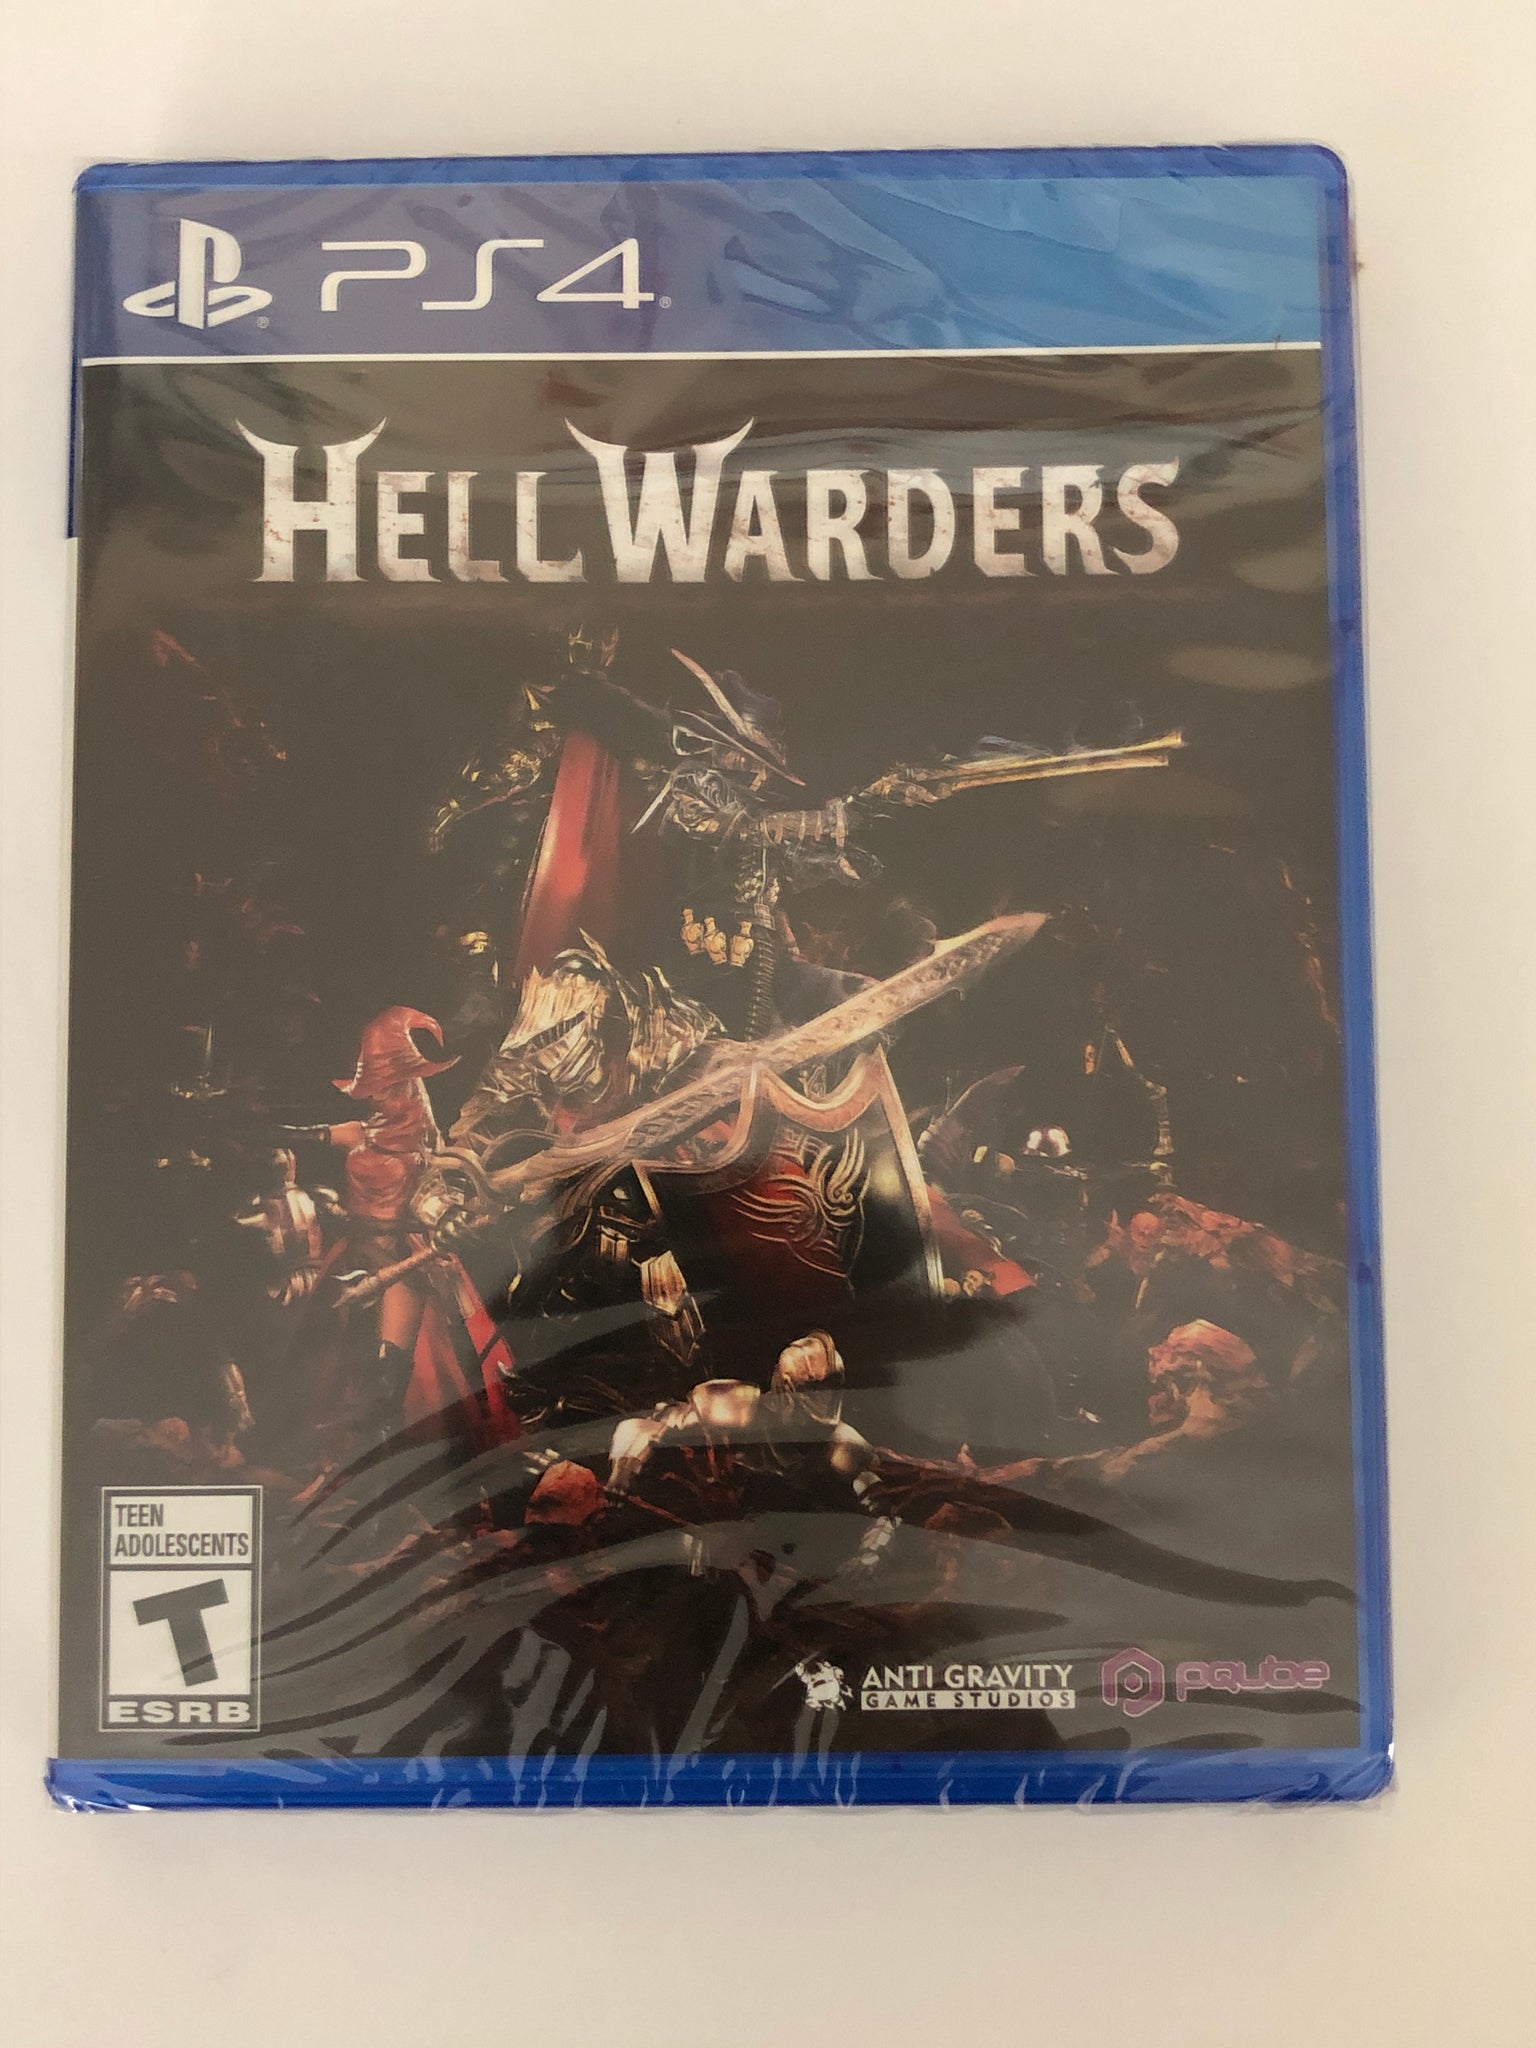 PS4 "Hell Warders"